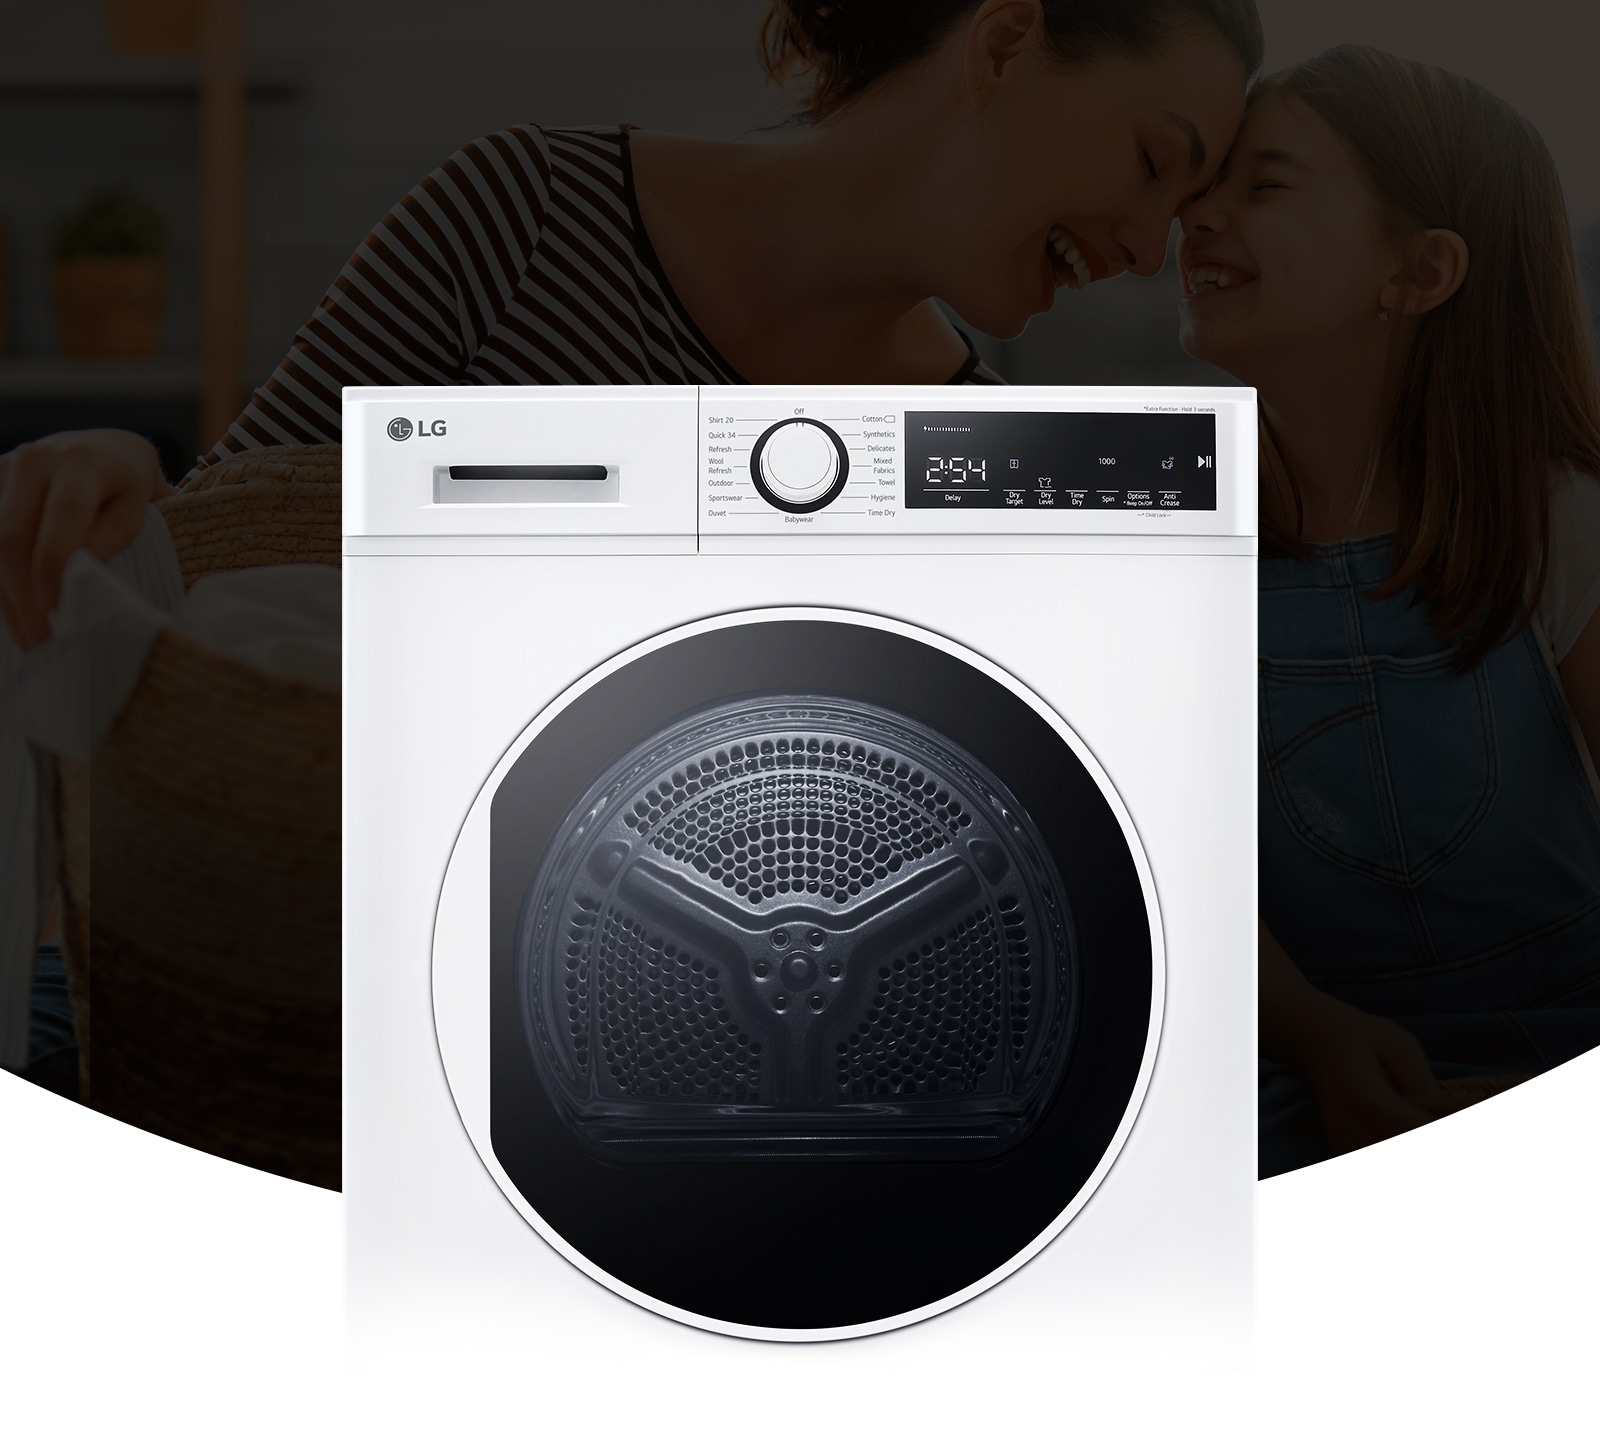 There is a dryer on the background of a smiling father and daughter.